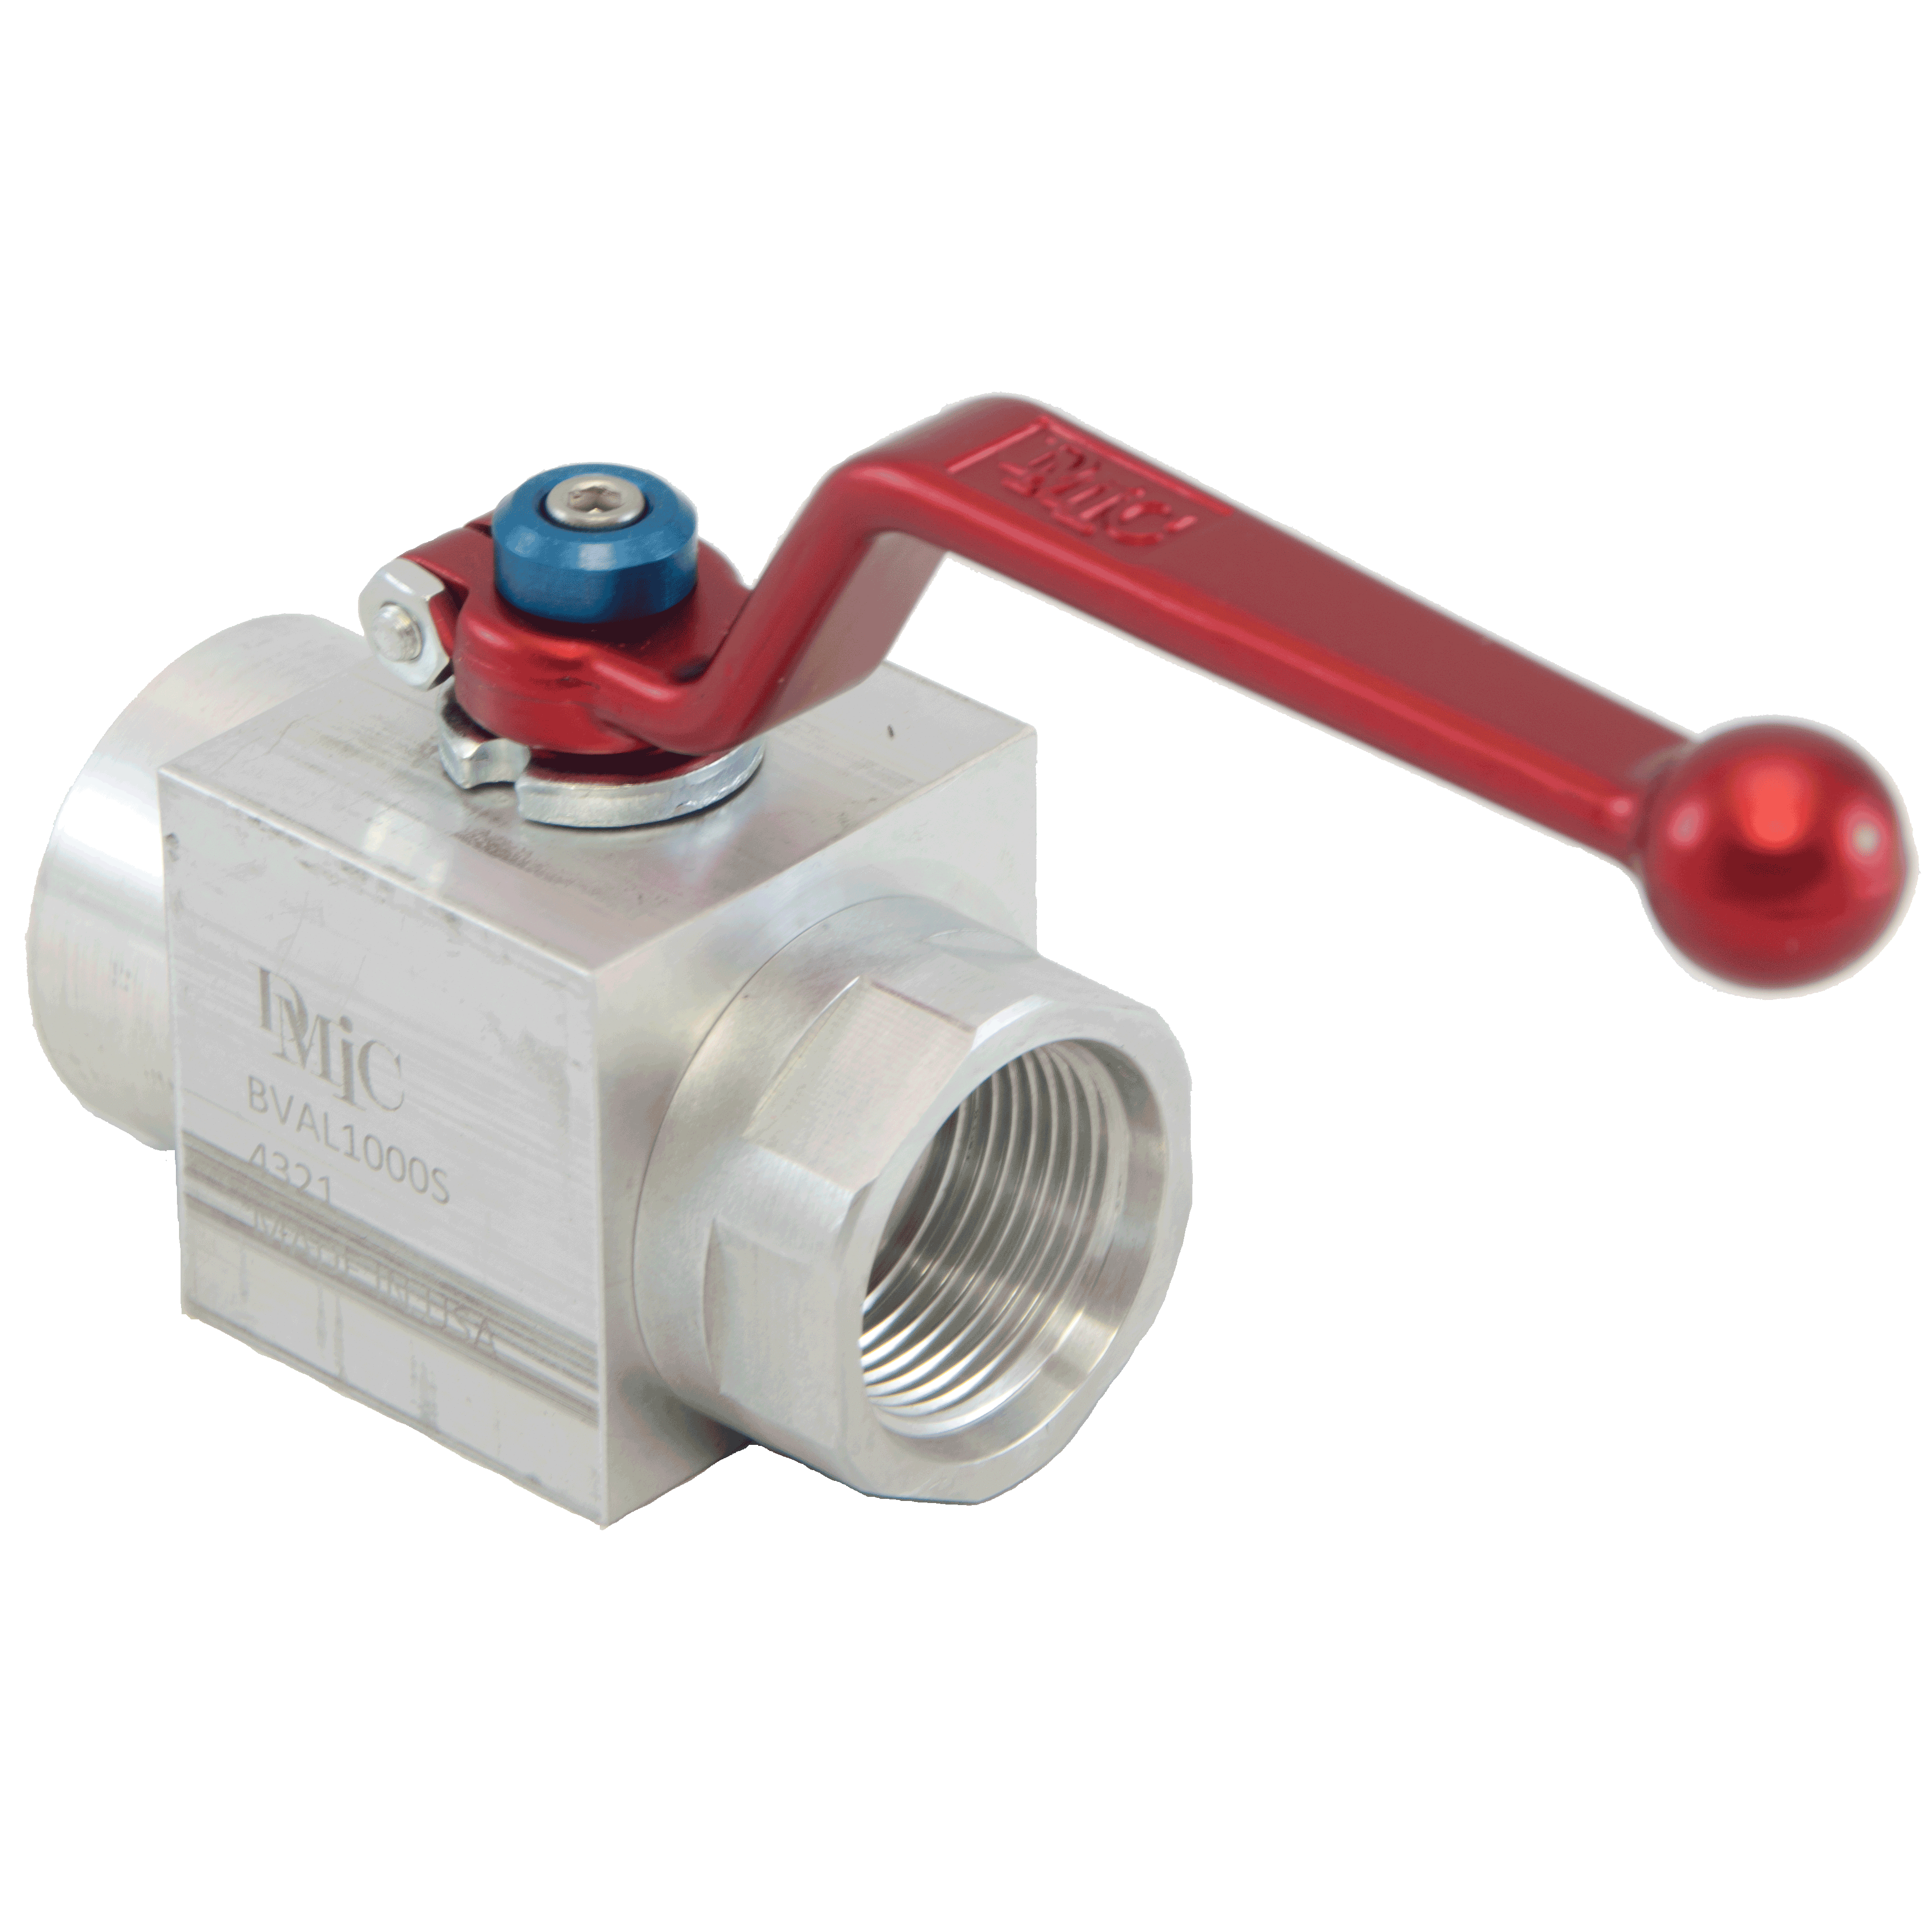 BVAL-4000N-4321-AZZN : DMIC Suction Ball Valve, 4 NPT, Aluminum, 400psi, Two-Way, with Locking Handle